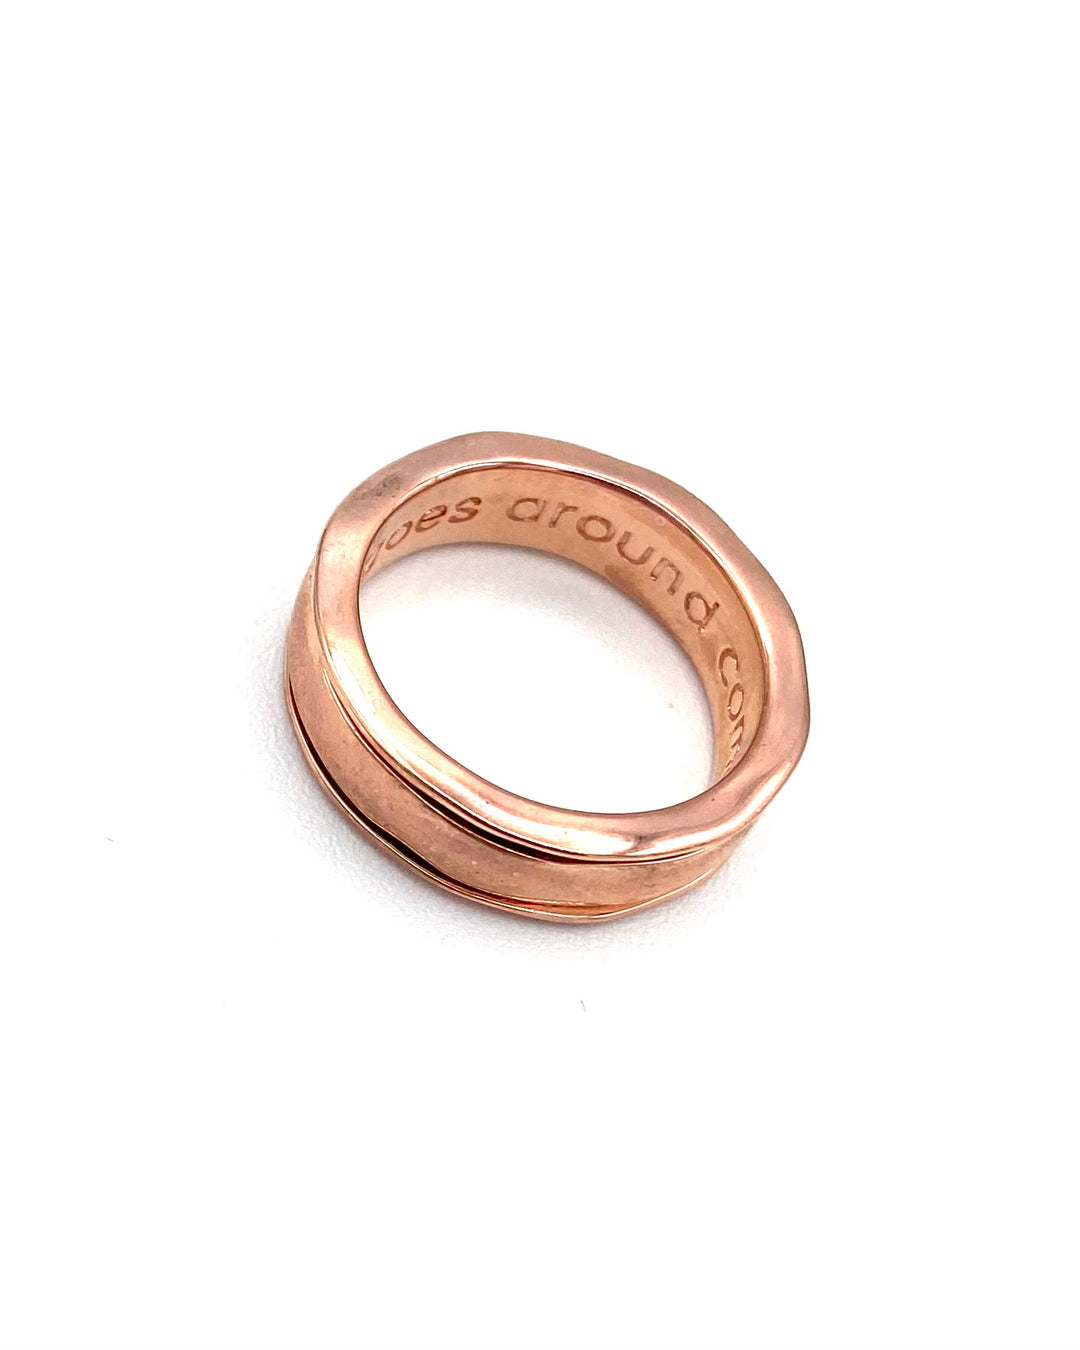 Rose Gold "What Goes Around" Ring - Size 7